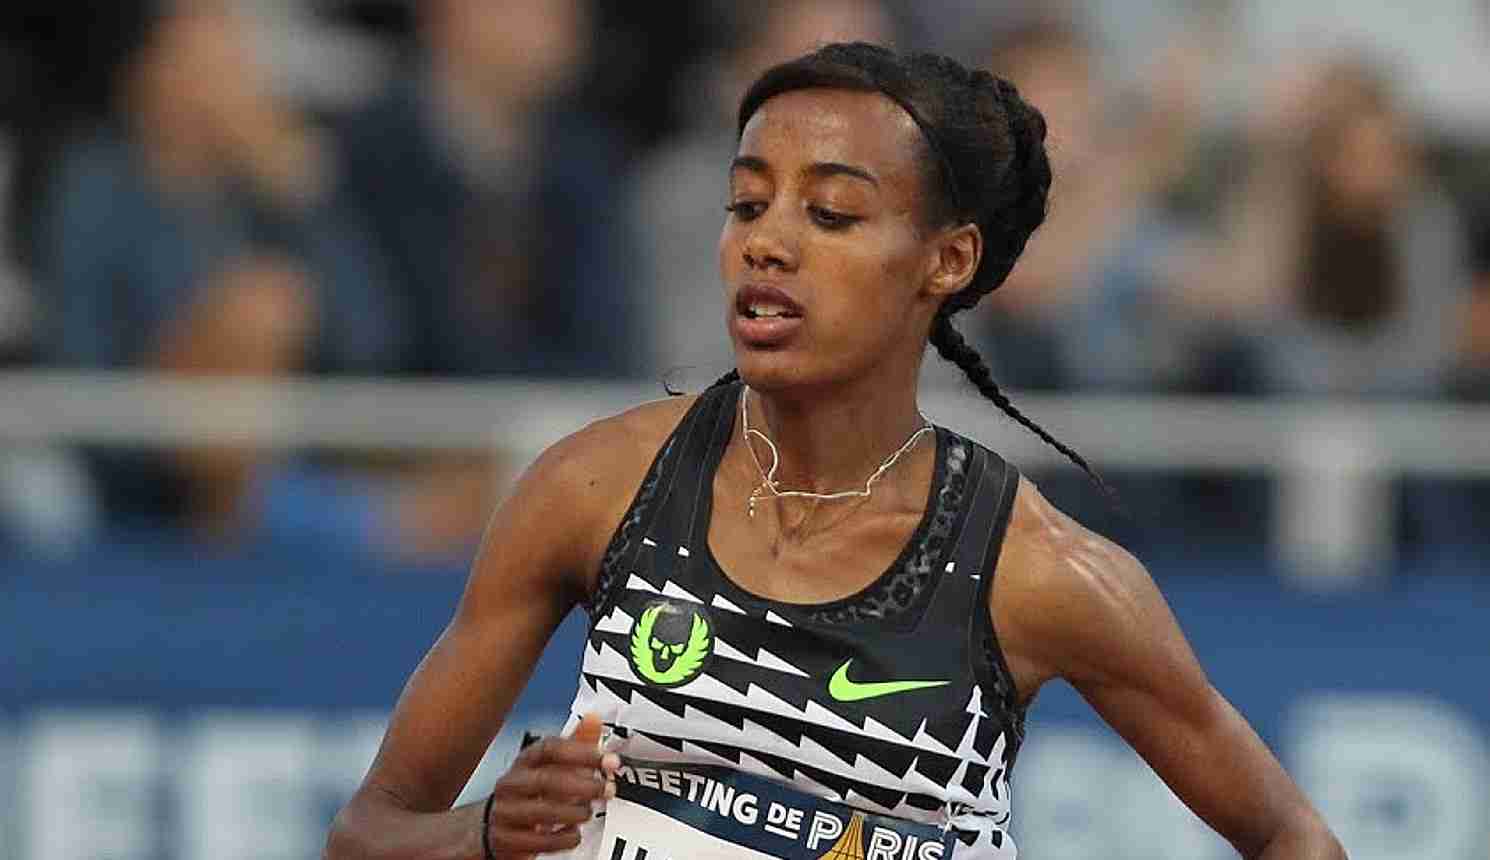 Sifan Hassan targets 5000m world record at Prefontaine Classic